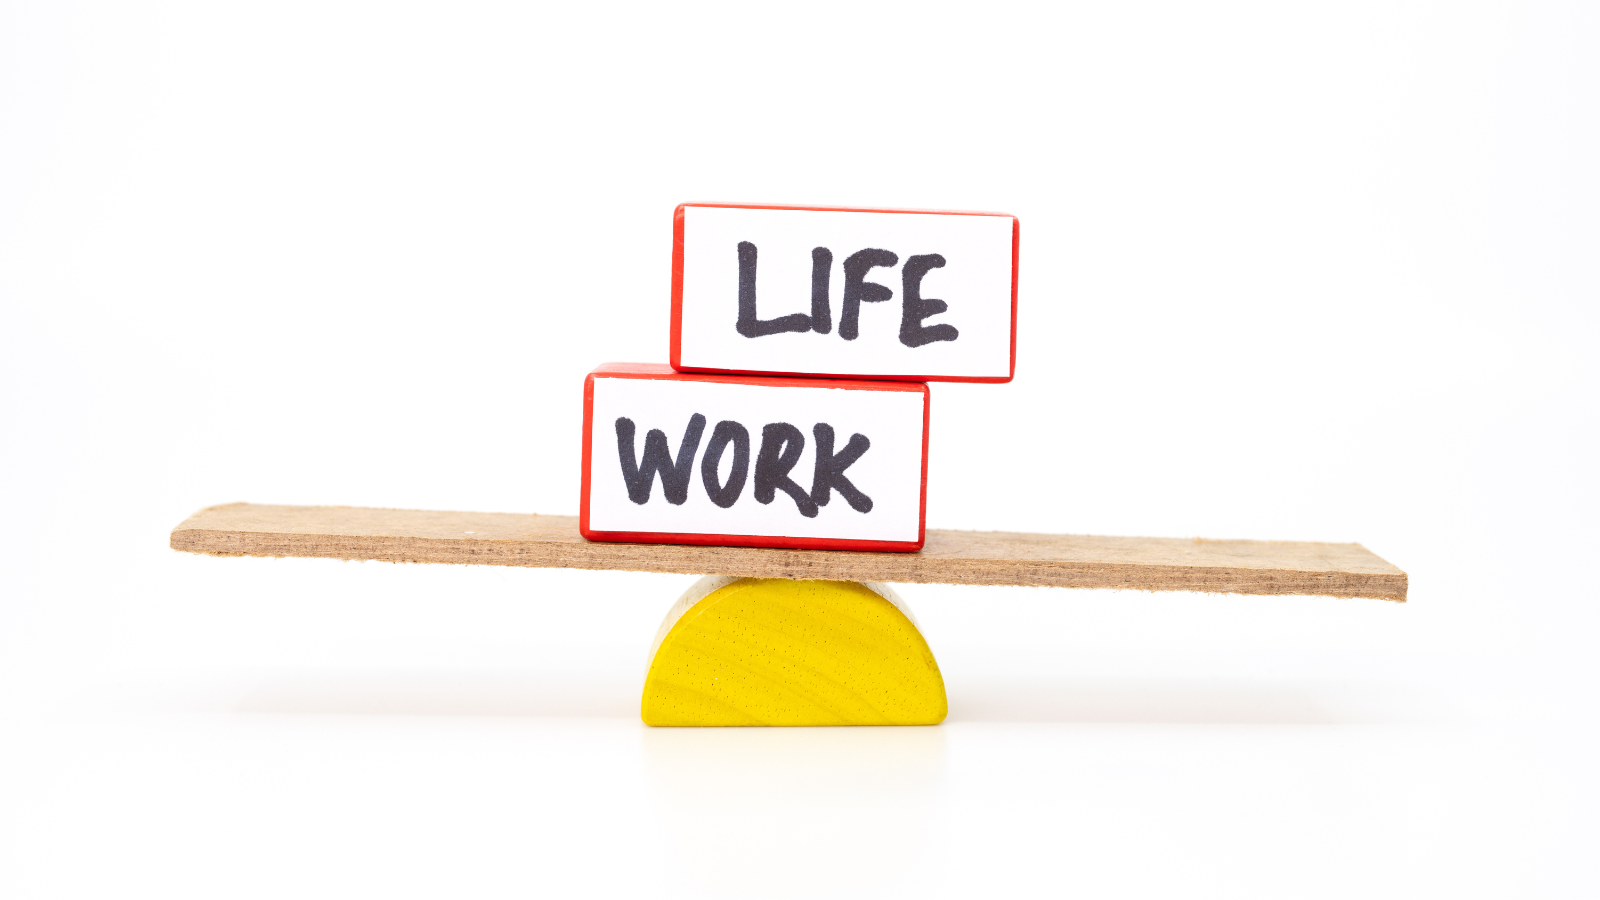 work life balance concept with two blocks representing work and life